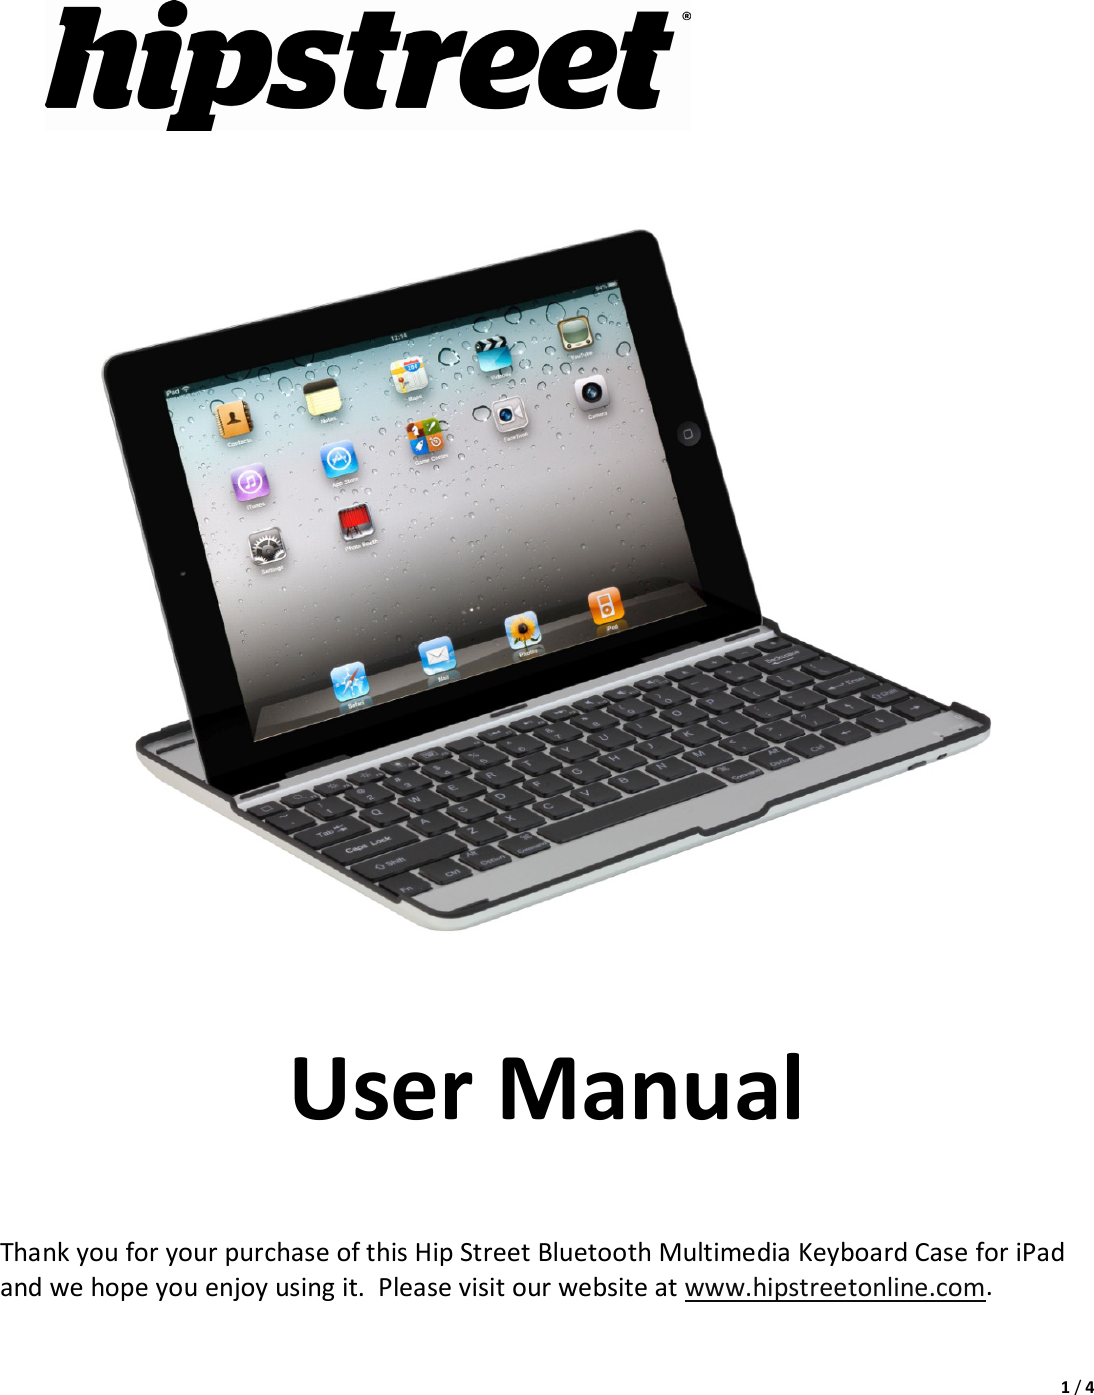 1/4 UserManualThankyouforyourpurchaseofthisHipStreetBluetoothMultimediaKeyboardCaseforiPadandwehopeyouenjoyusingit.Pleasevisitourwebsiteatwww.hipstreetonline.com.